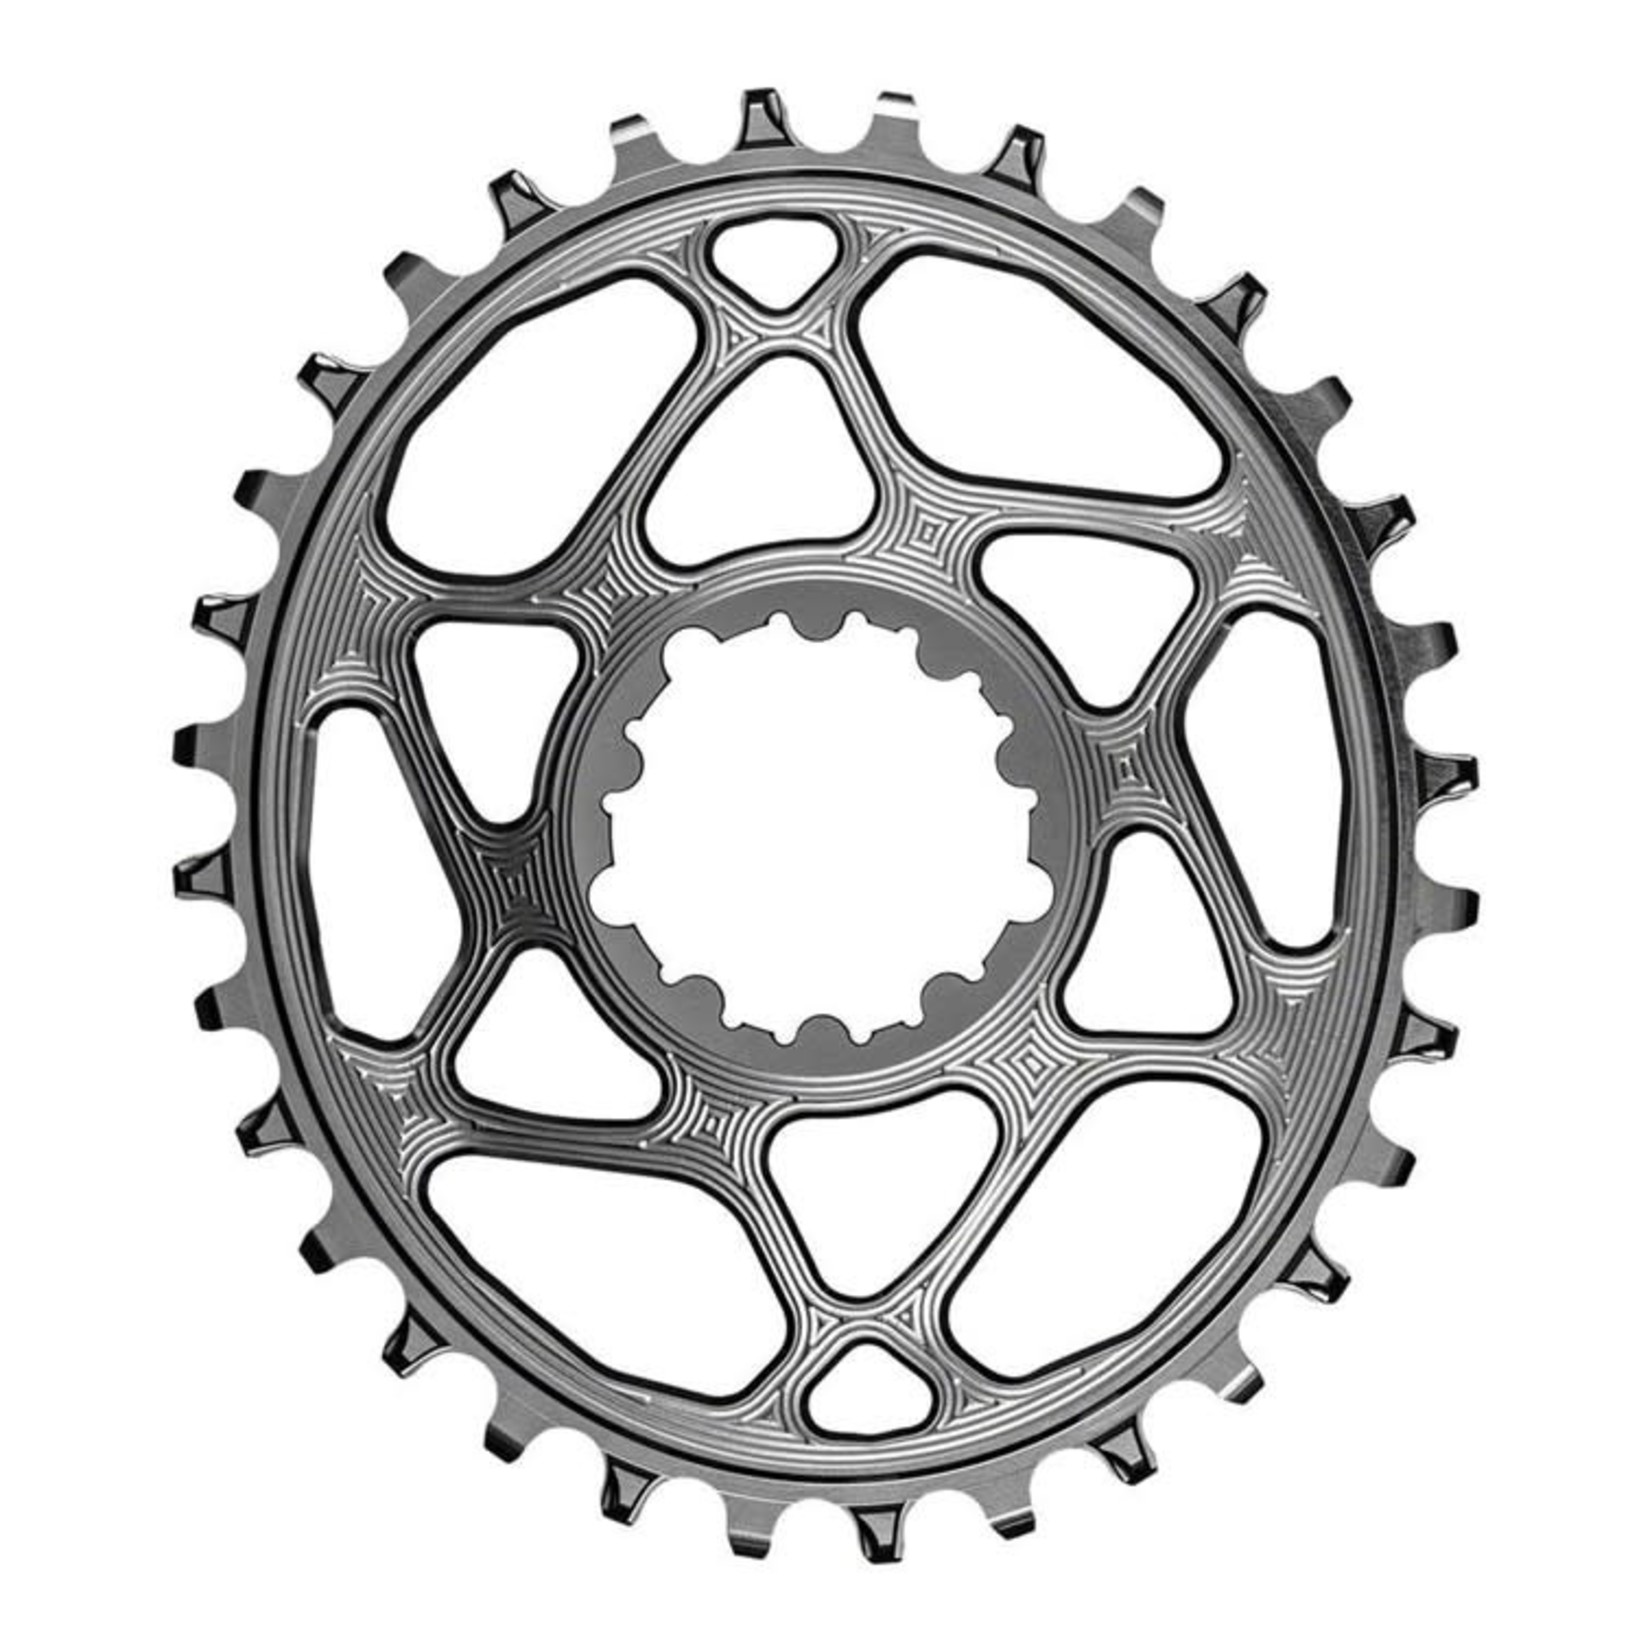 absoluteBLACK Direct Mount Narrow Wide 32T Chainring